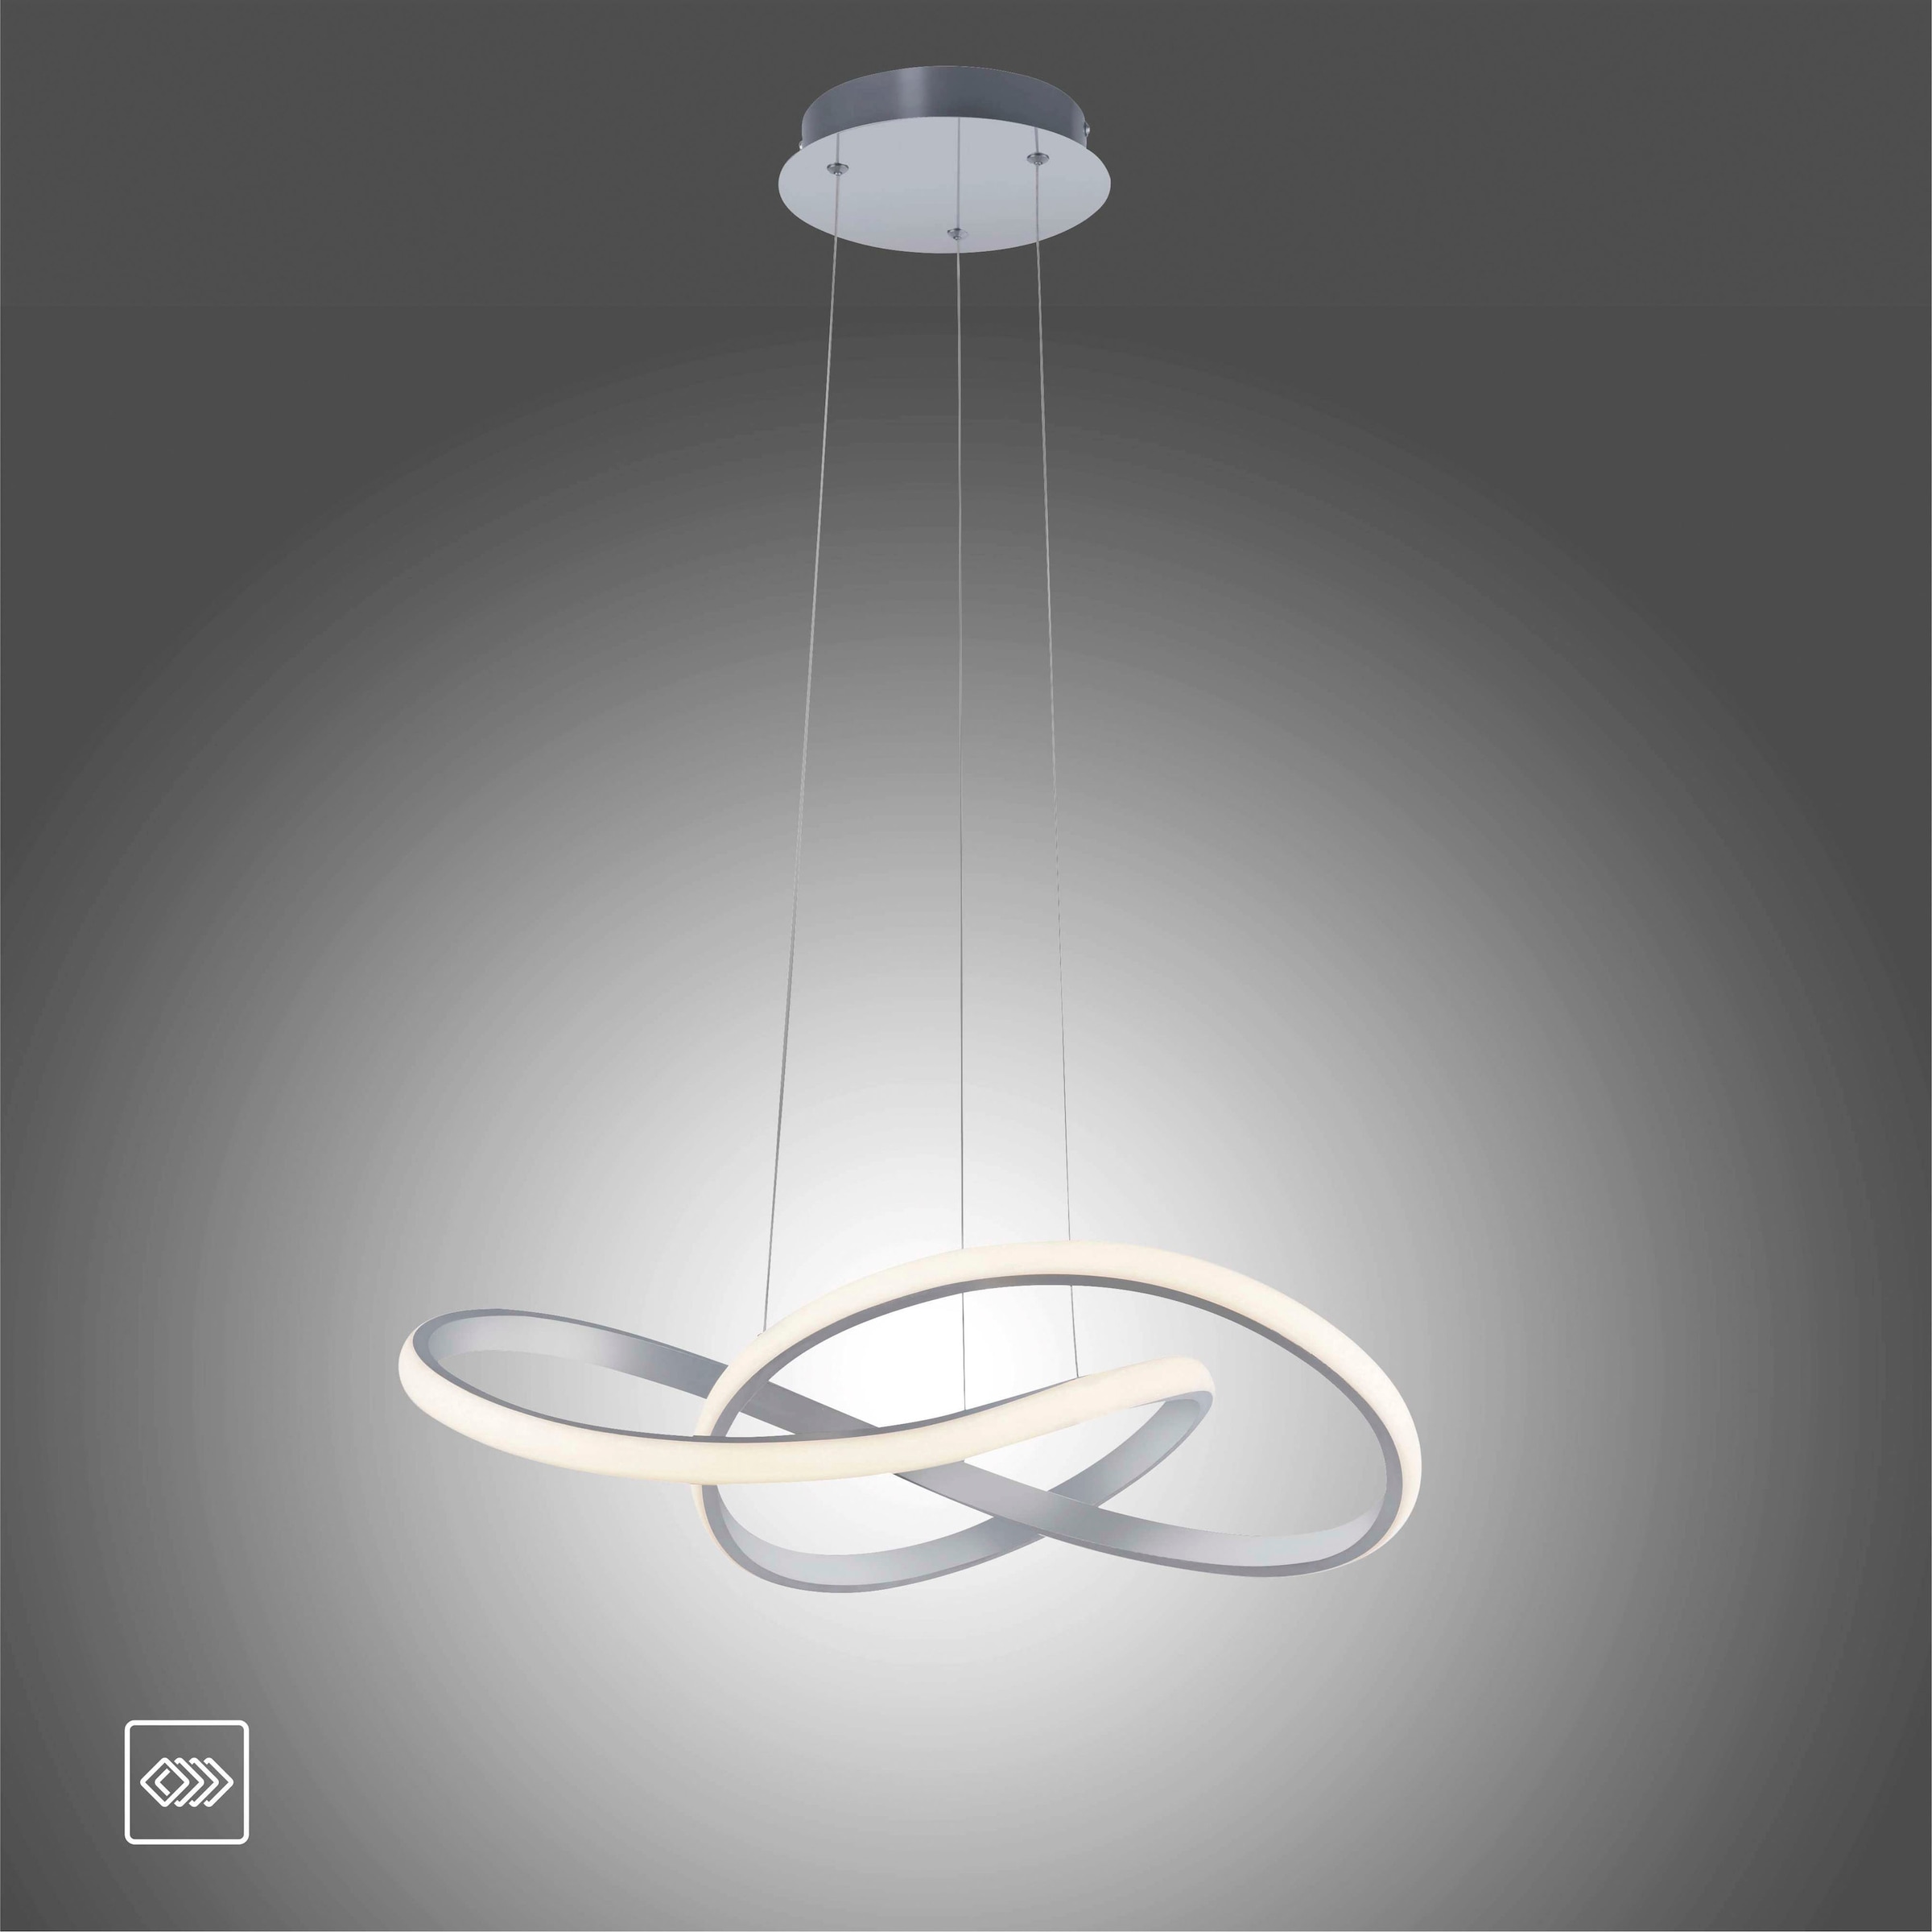 JUST LIGHT 1 bei dimmbar, »MARIA«, Switchmo flammig-flammig, LED, Pendelleuchte OTTO